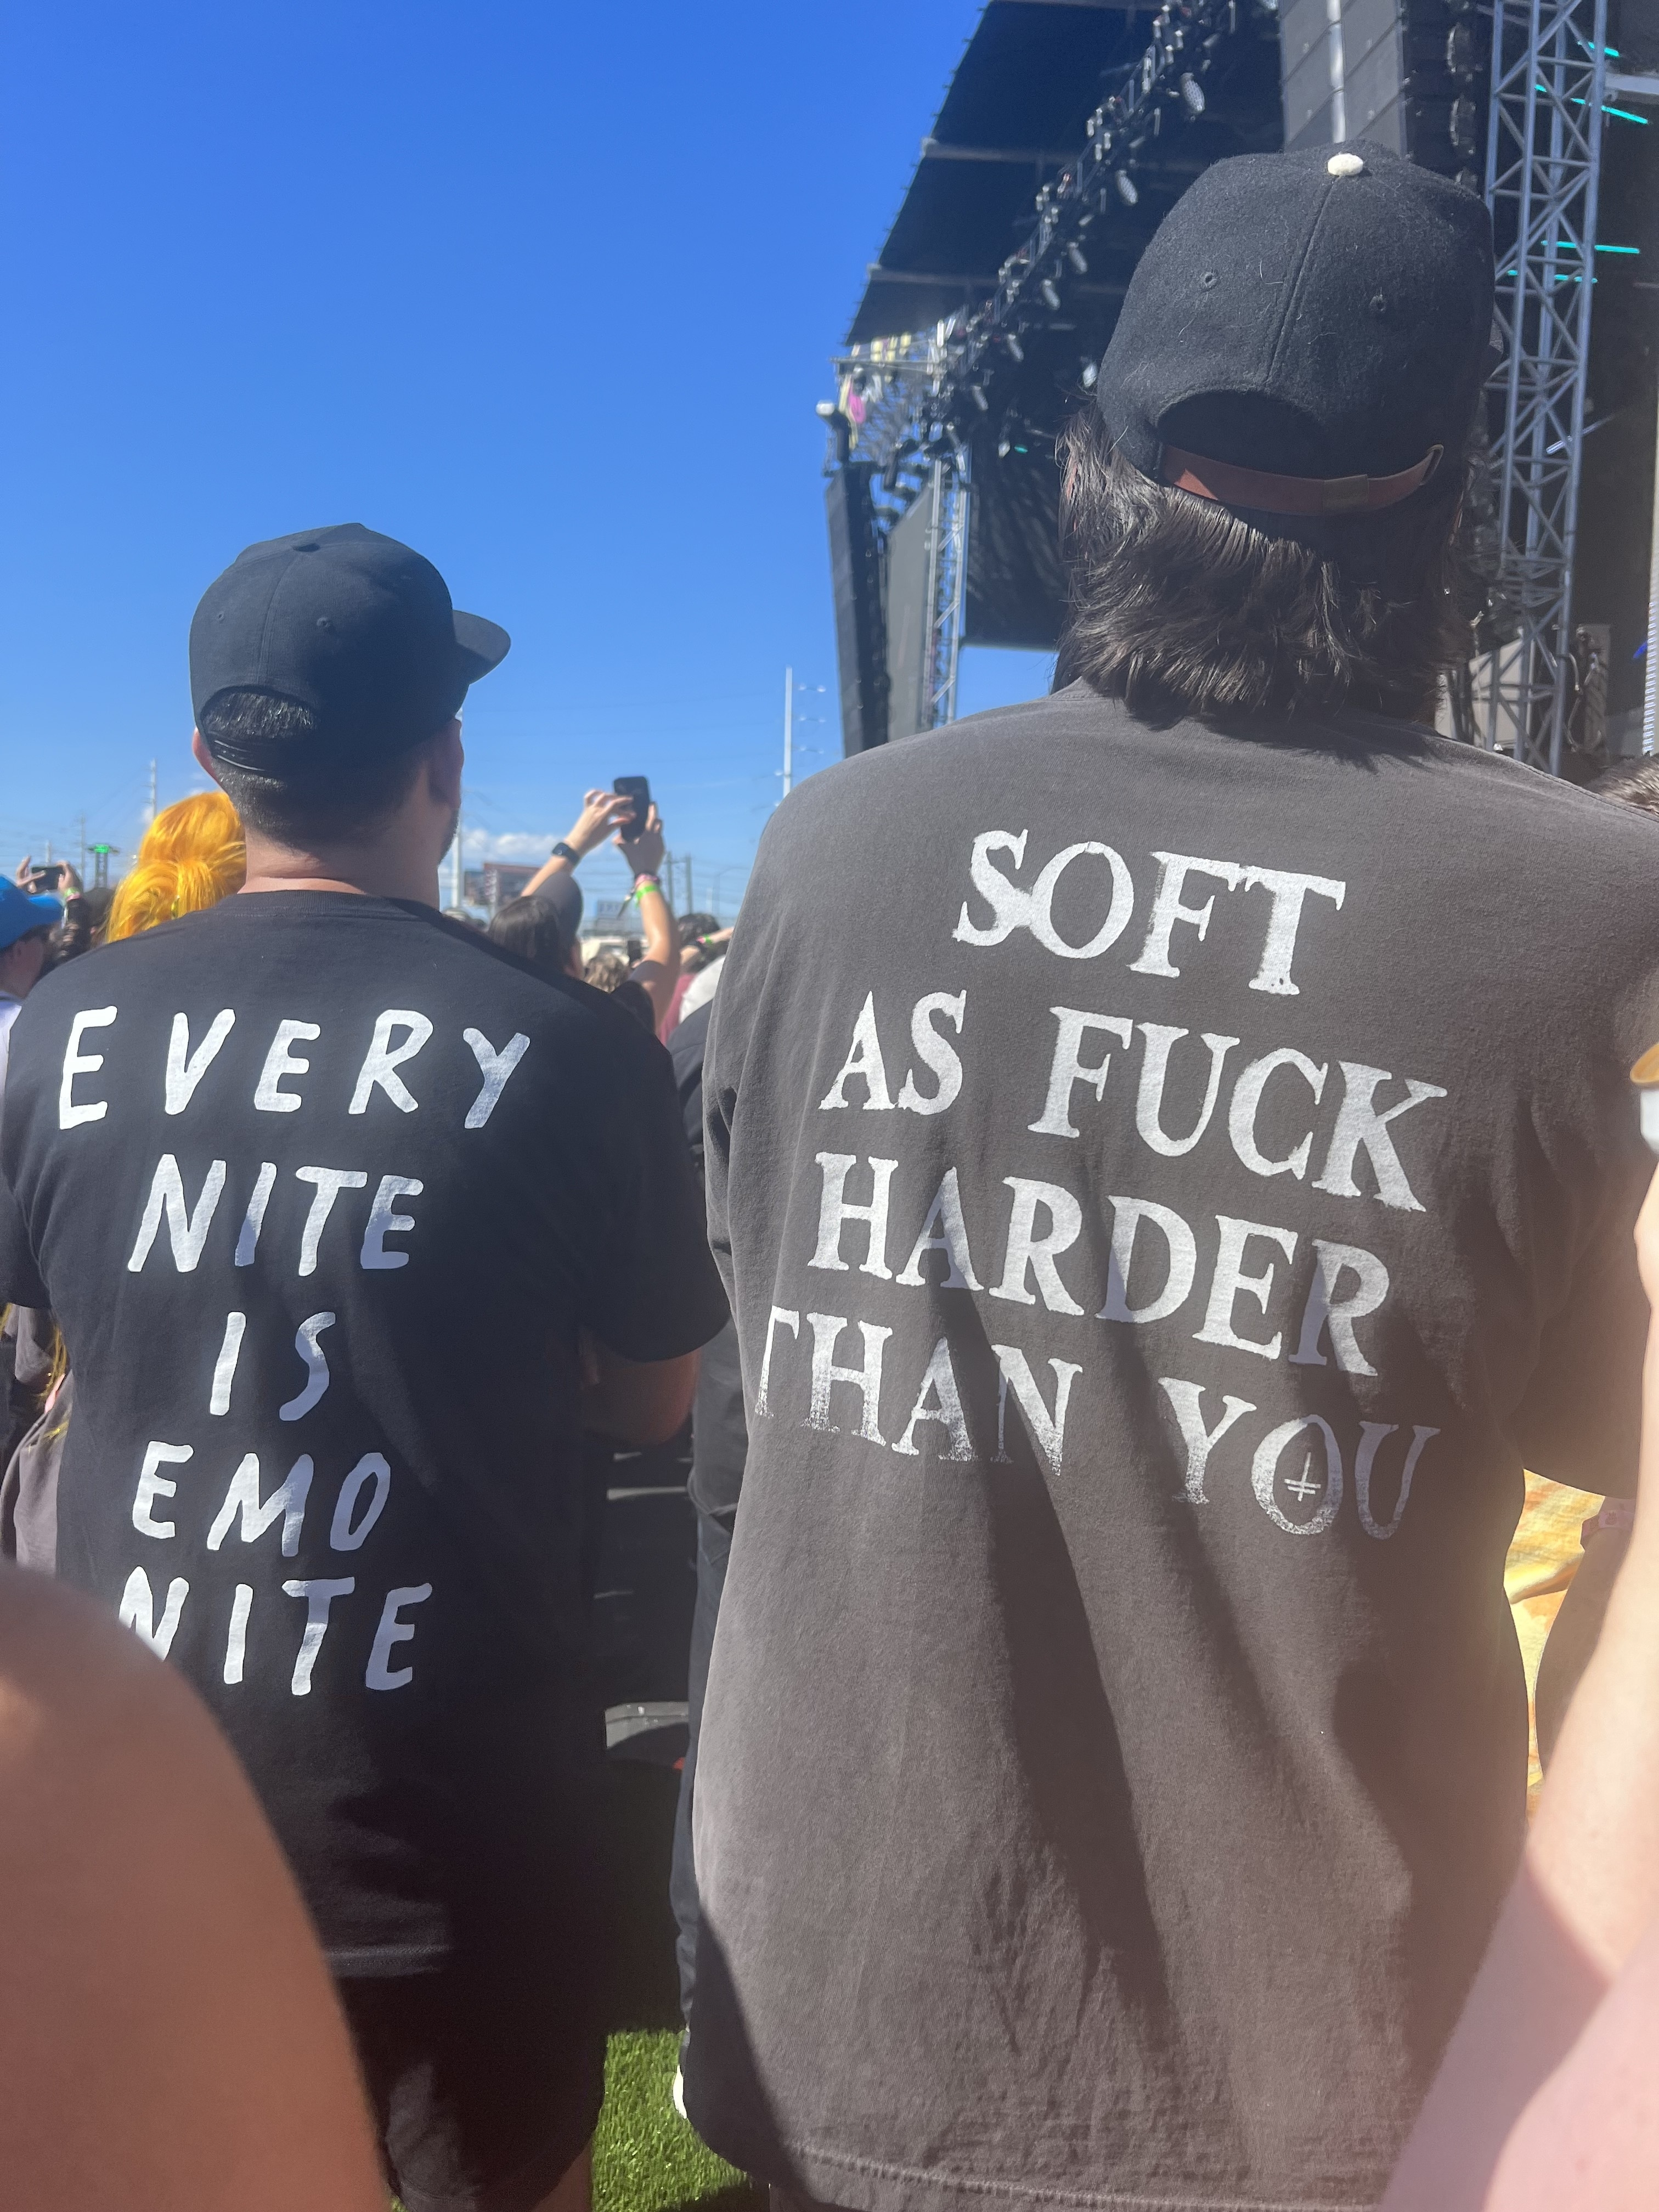 guys wearing shirts reading, every nite is emo nite and soft as fuck harder than you